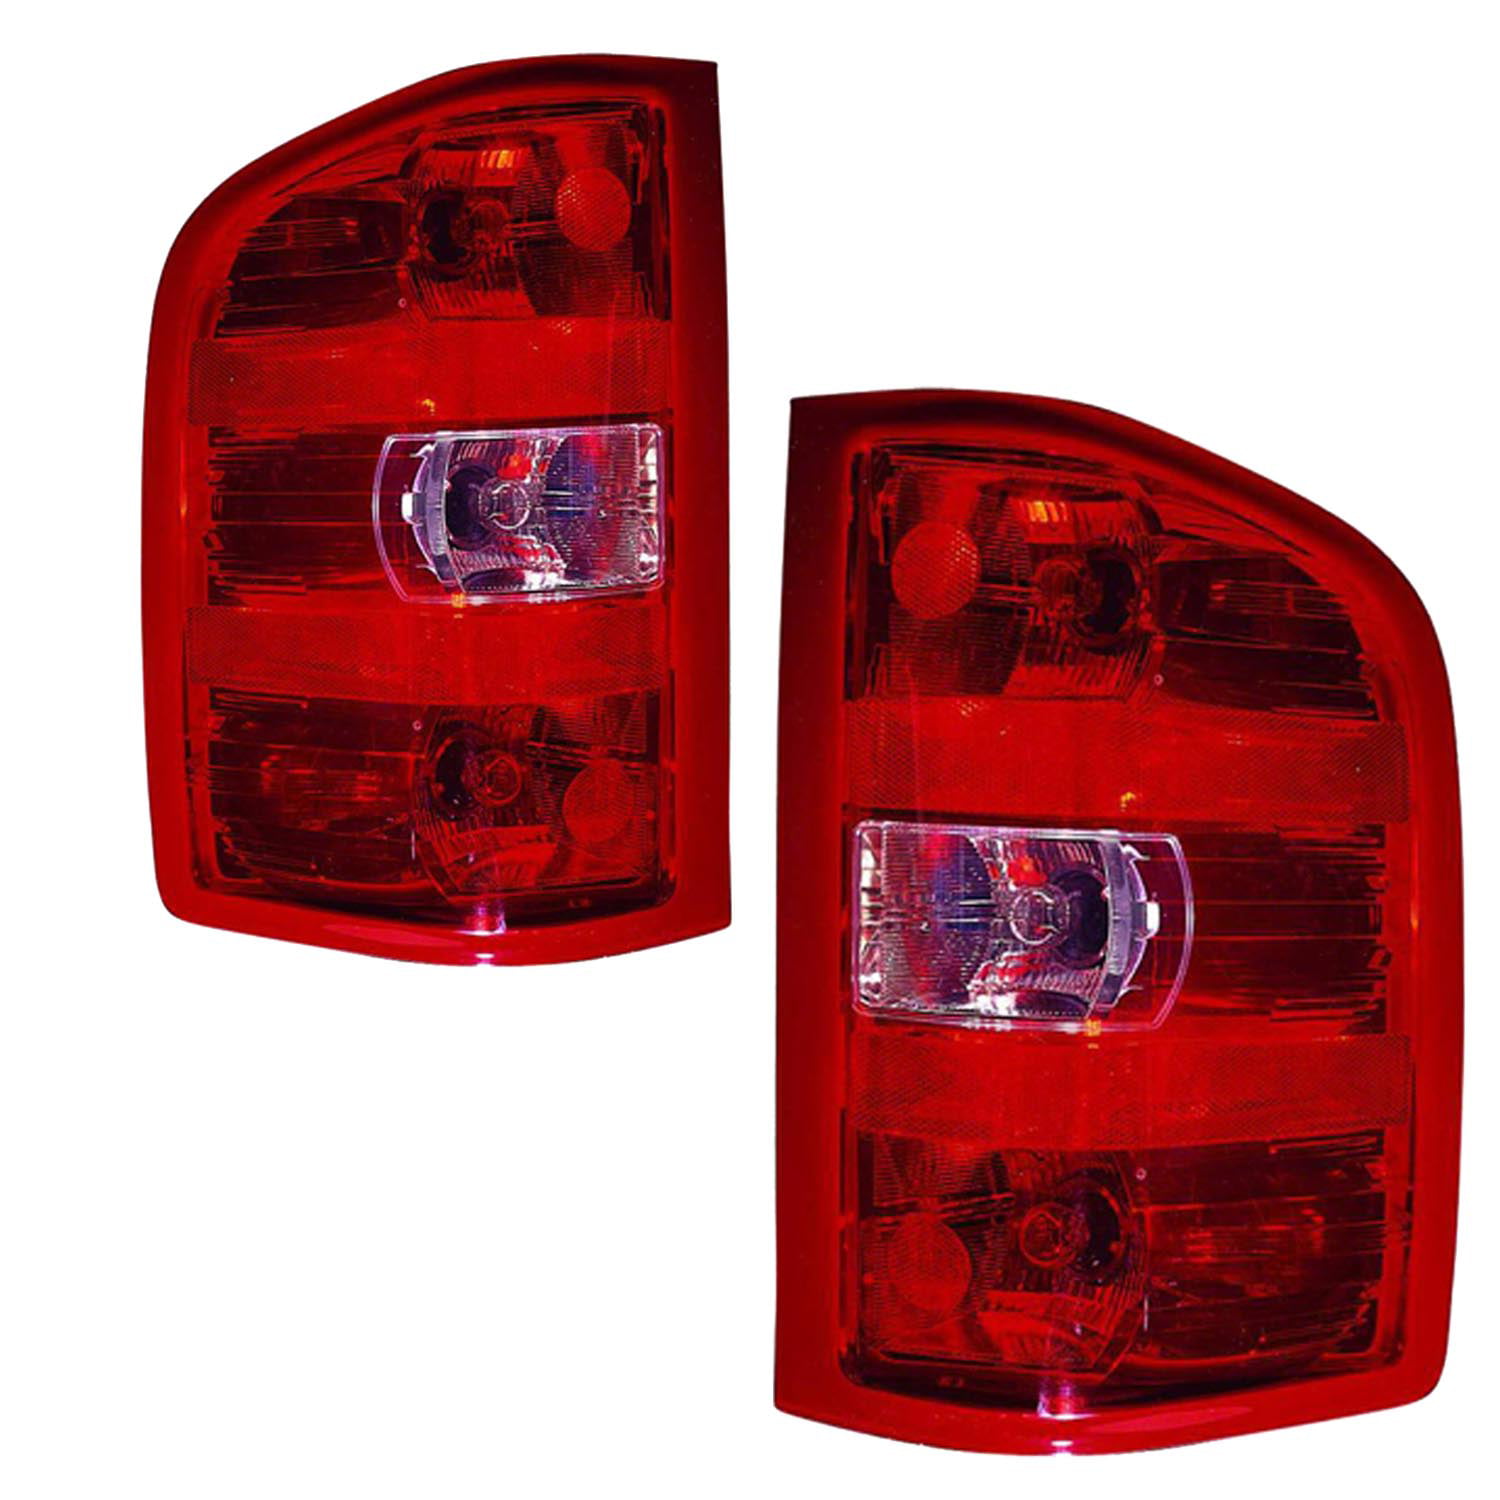 HEADLIGHTSDEPOT Tail Light Compatible with Chevrolet Silverado 1500 HD 2500 HD 3500 HD Includes Left Driver and Right Passenger Side Tail Lights 